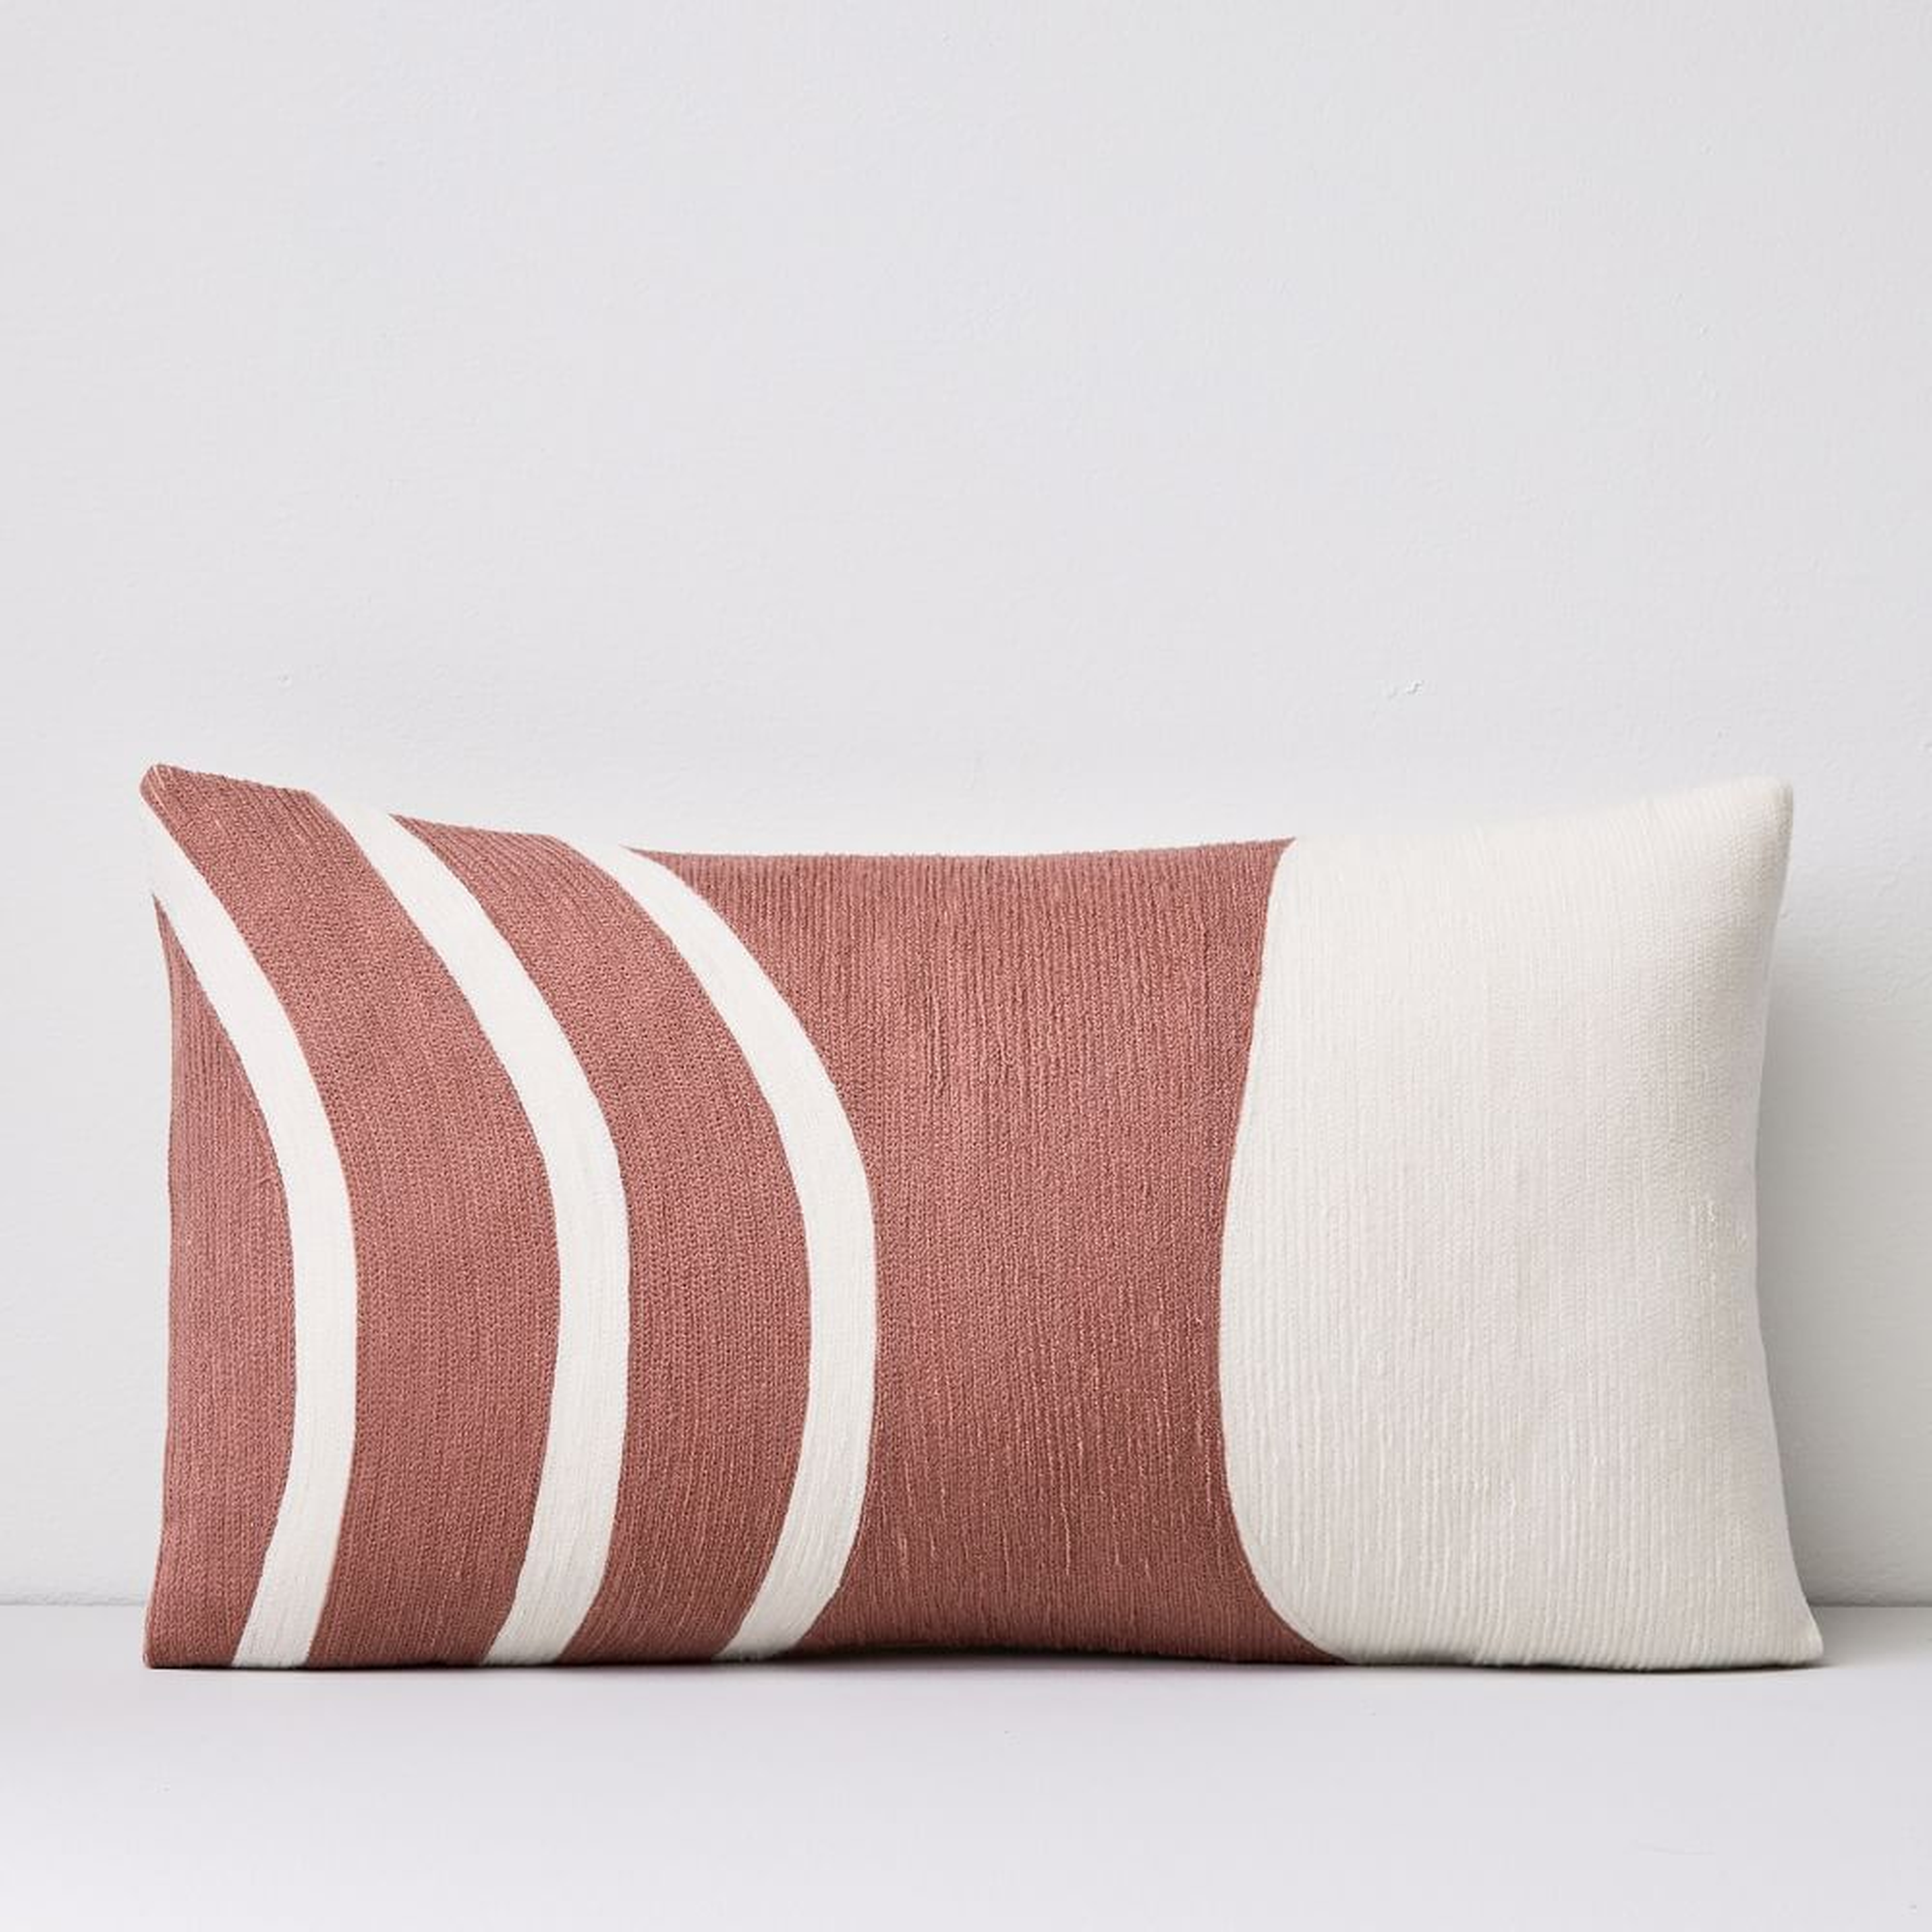 Crewel Rounded Pillow Cover, Pink Stone, 12"x21" - West Elm